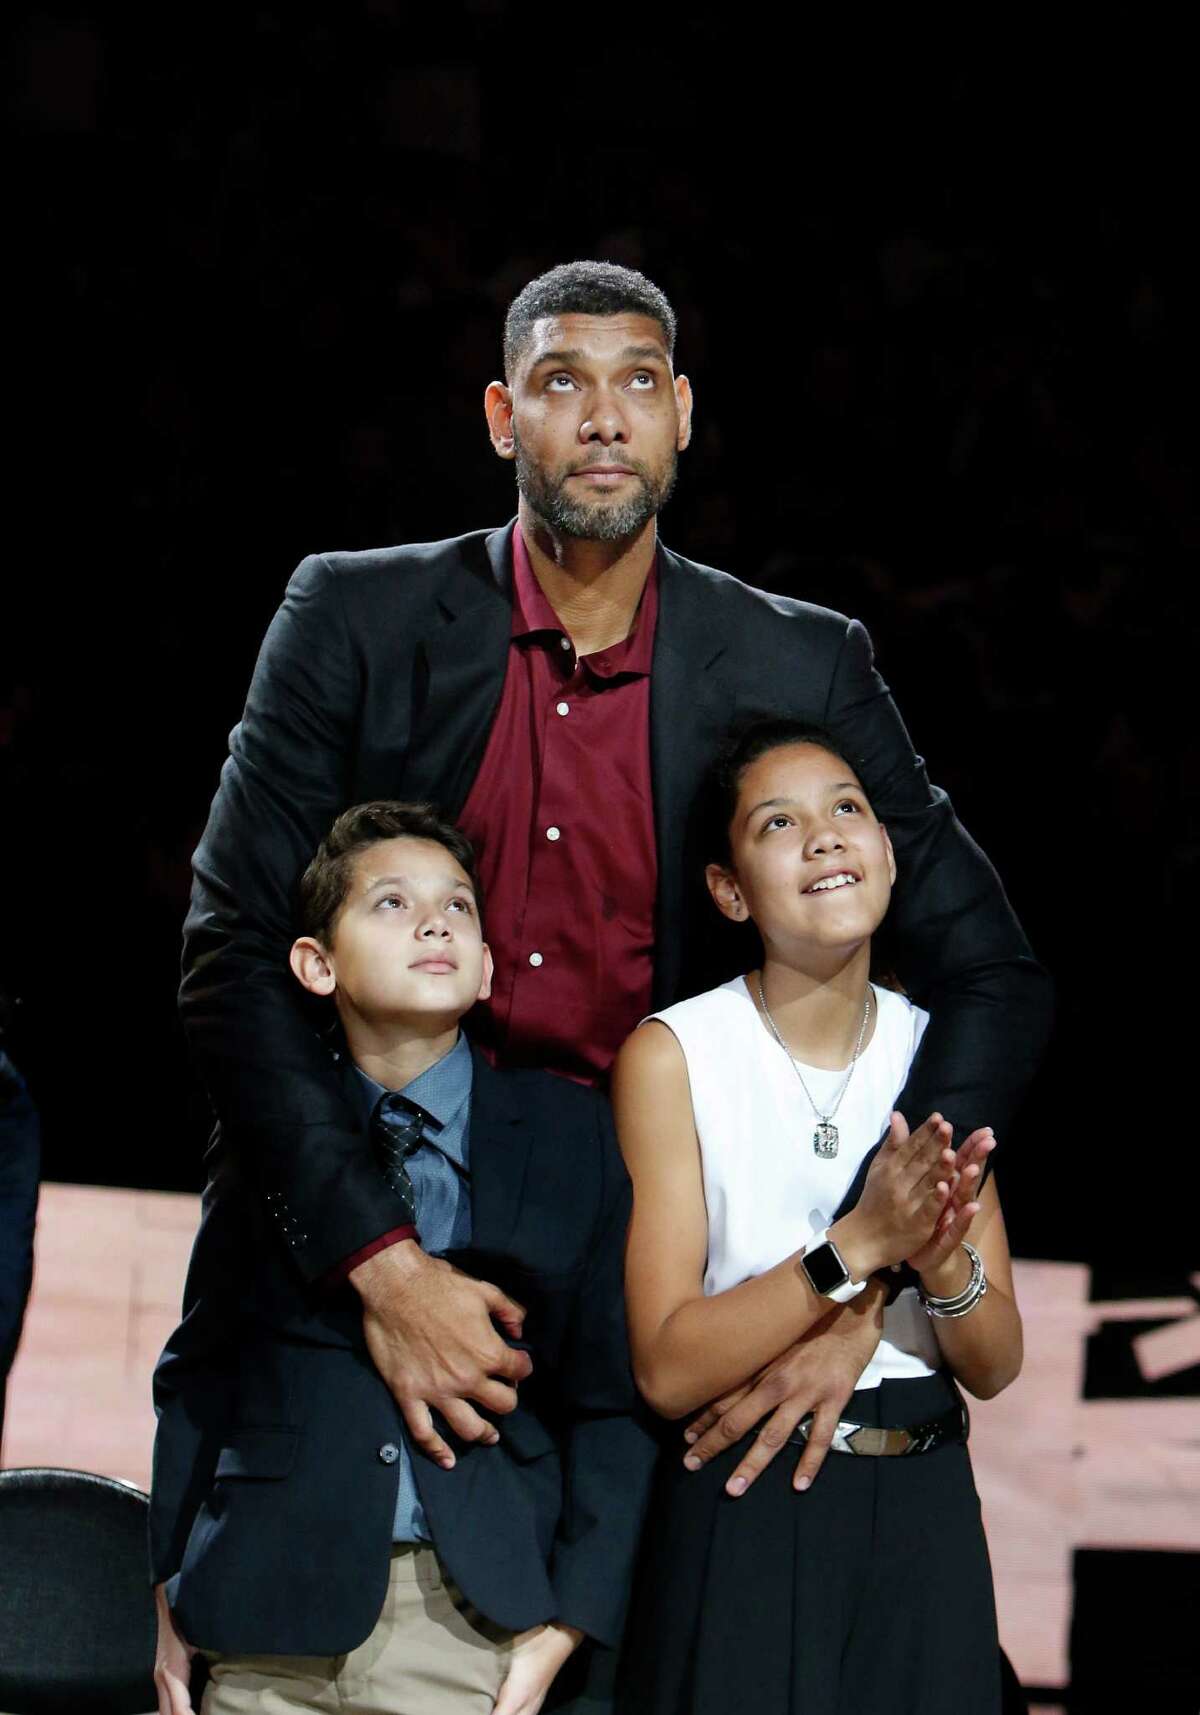 tim duncan and his daughter｜TikTok Search